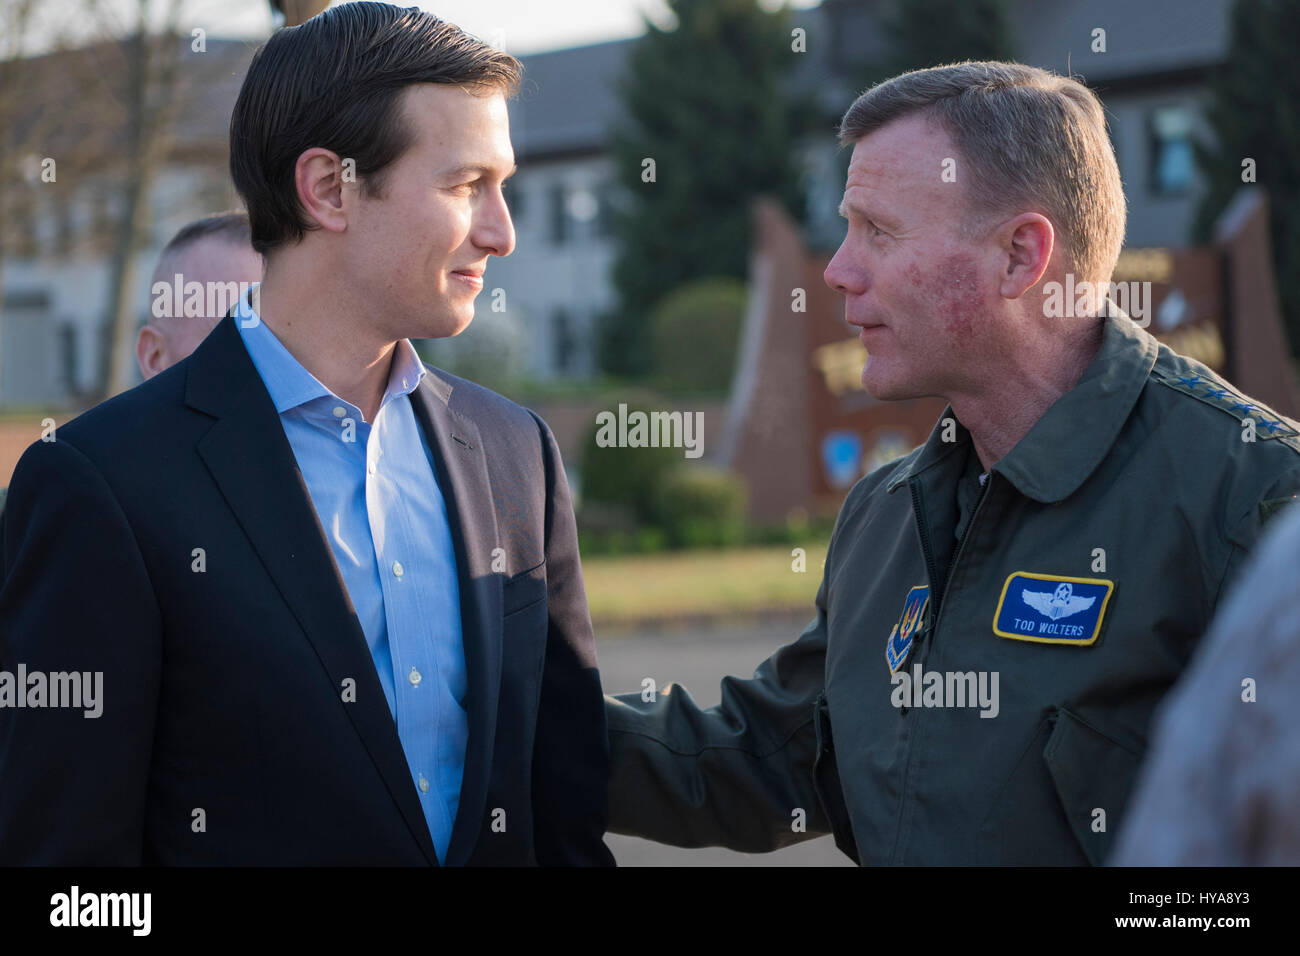 Kaiserslautern, Germany. 03rd Apr, 2017. U.S. Air Force Gen. Tod Wolters, commander, U.S. Air Forces in Europe and Africa, right, chats with Jared Kushner, Senior Advisor and son-in-law to President Trump on departure from Ramstein Air Base for a visit to Iraq April 3, 2017 in Kaiserslautern, Rheinland-Pfalz, Germany. Credit: Planetpix/Alamy Live News Stock Photo